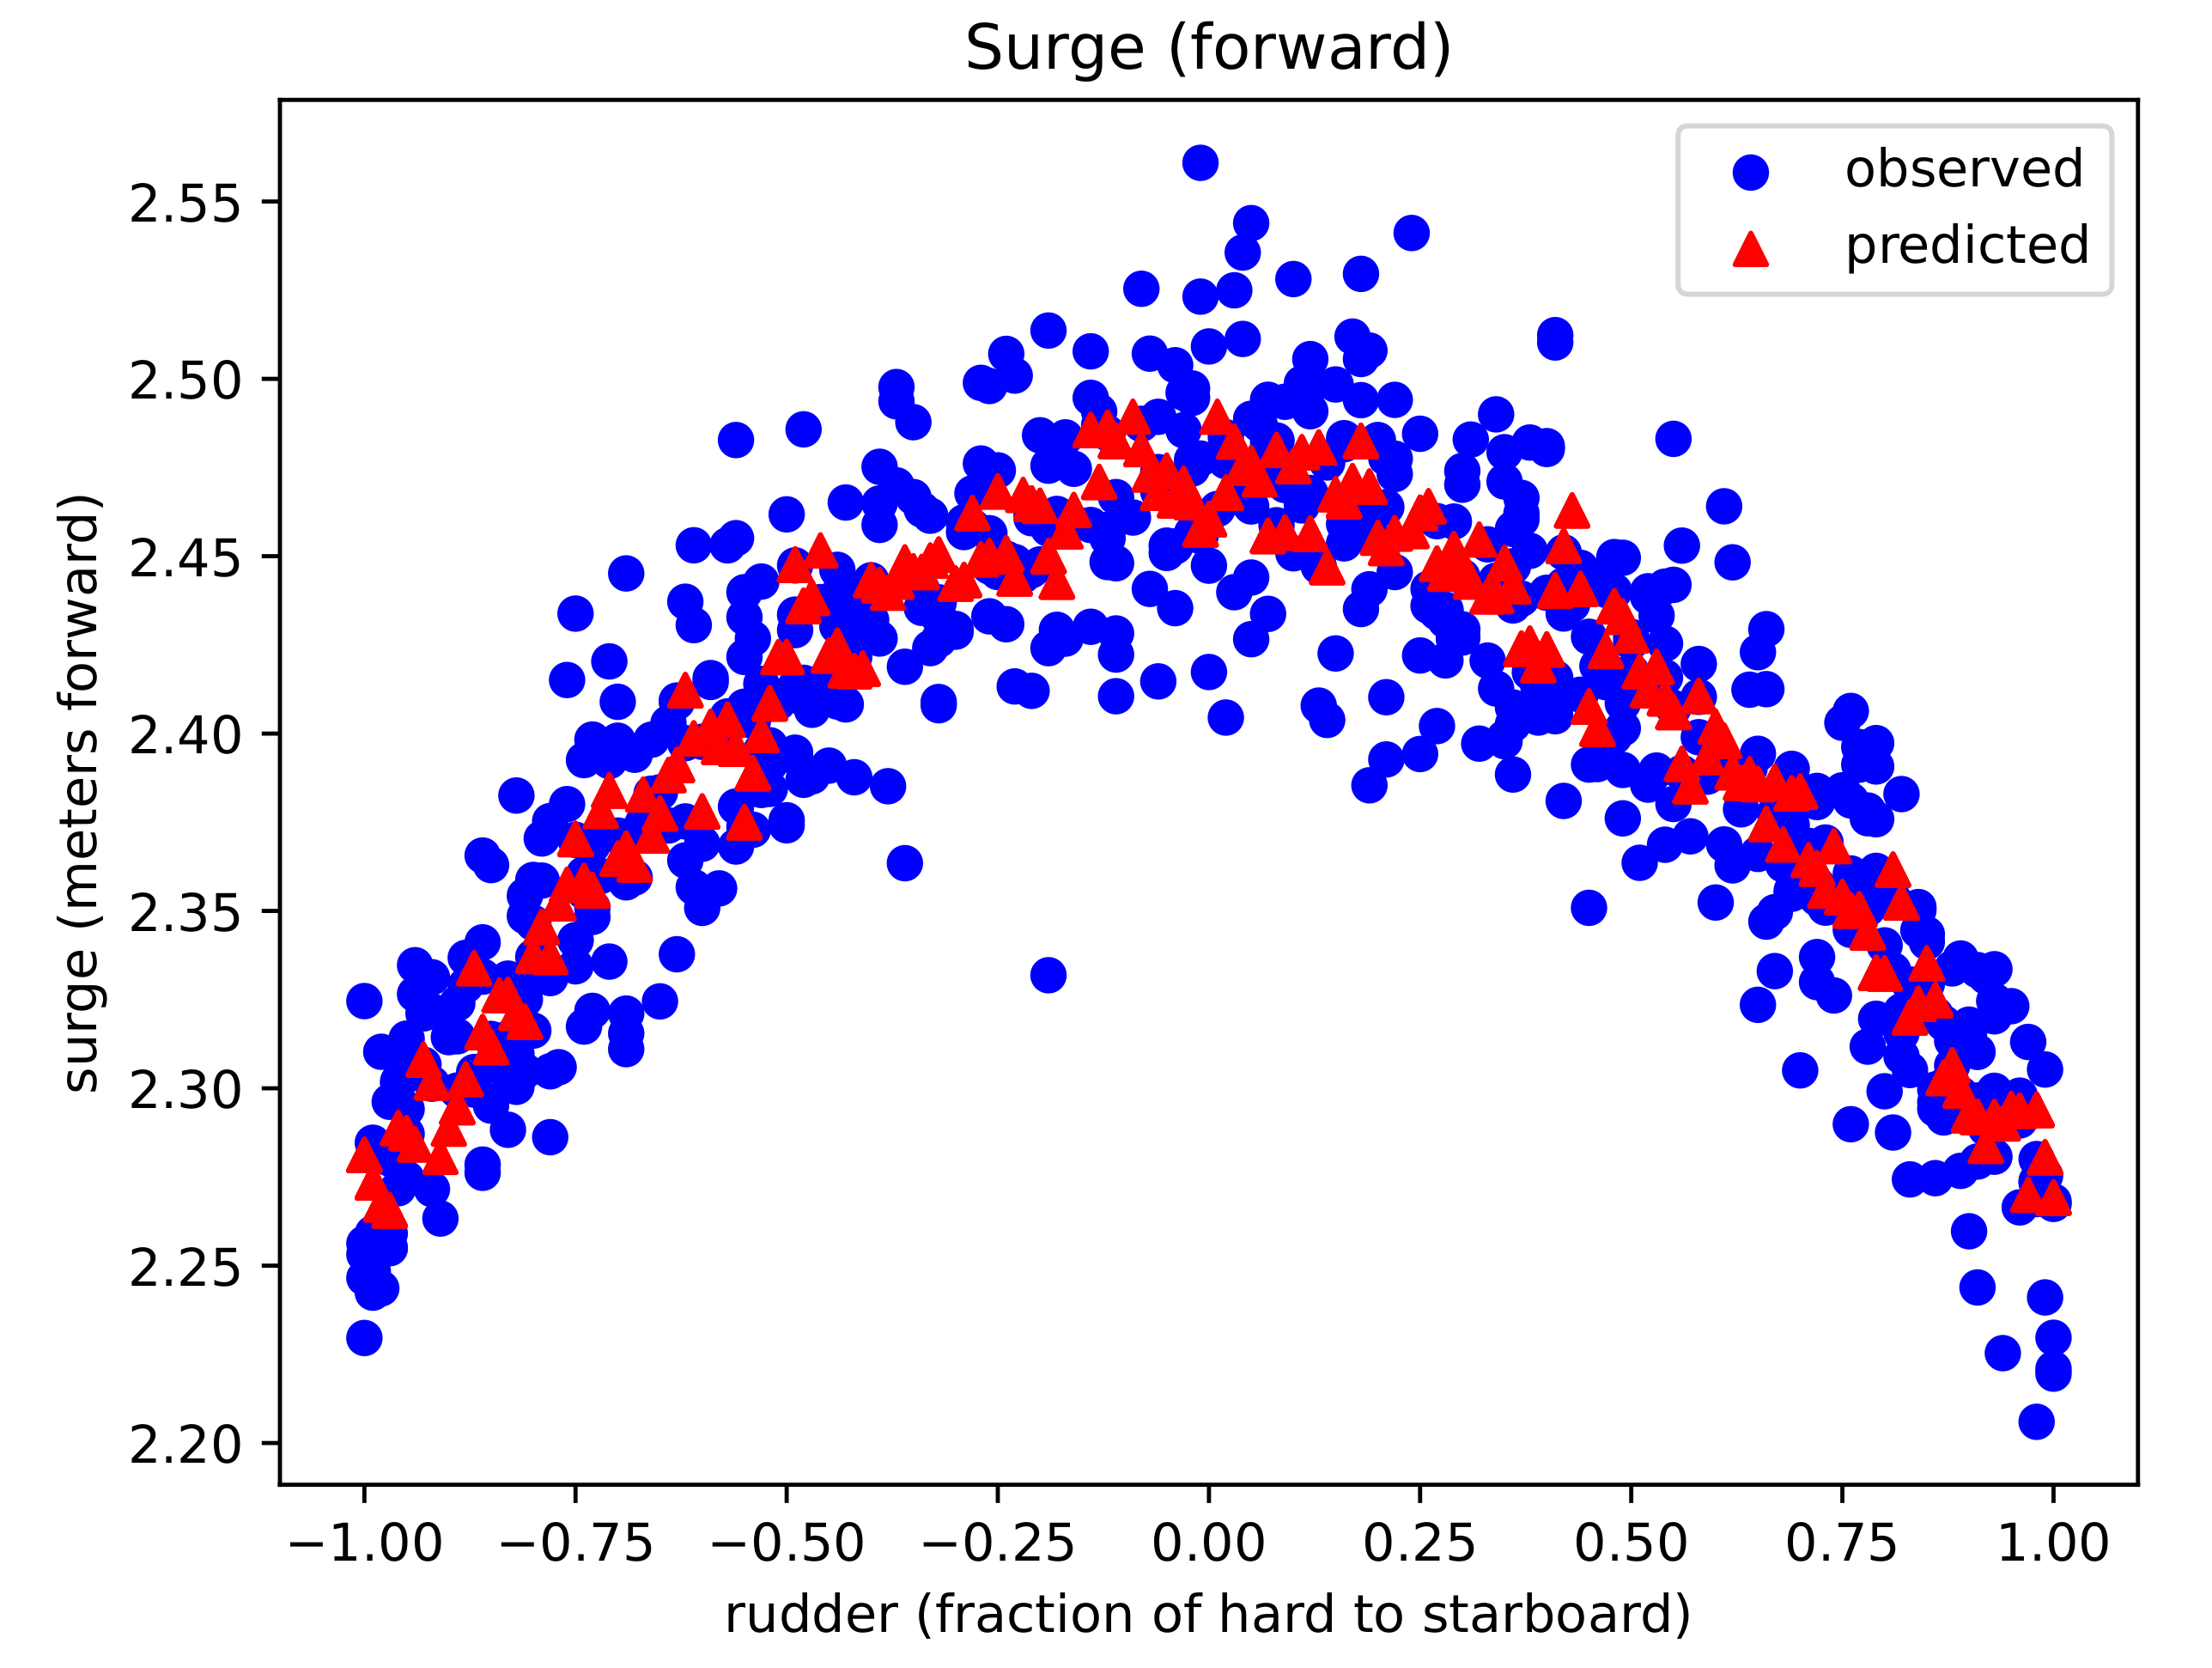 Sampled and predicted forward surge by normalized rudder angle